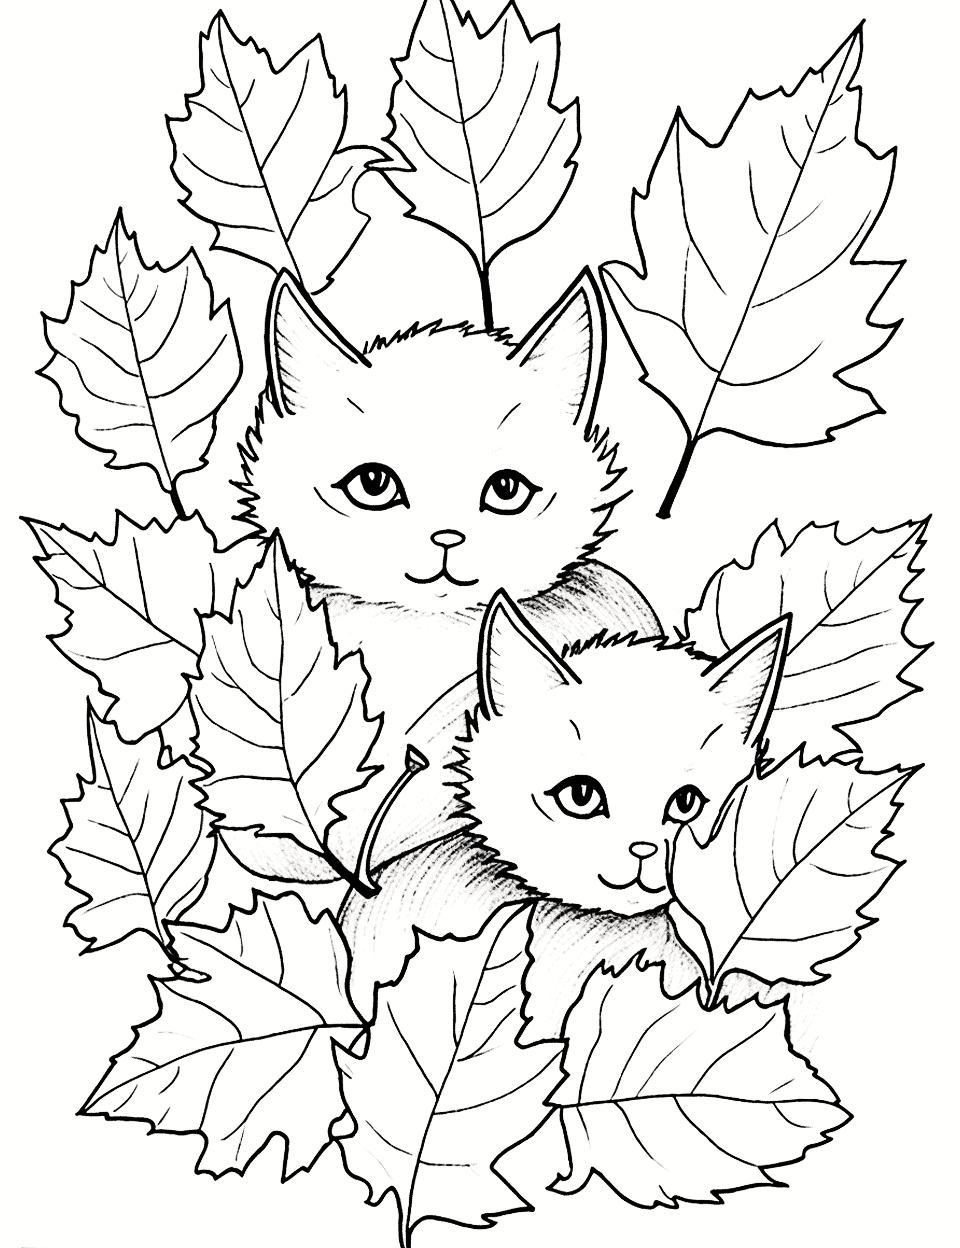 Kittens in Leaf Pile Fall Coloring Page - A couple of cute kittens playing in a pile of autumn leaves.